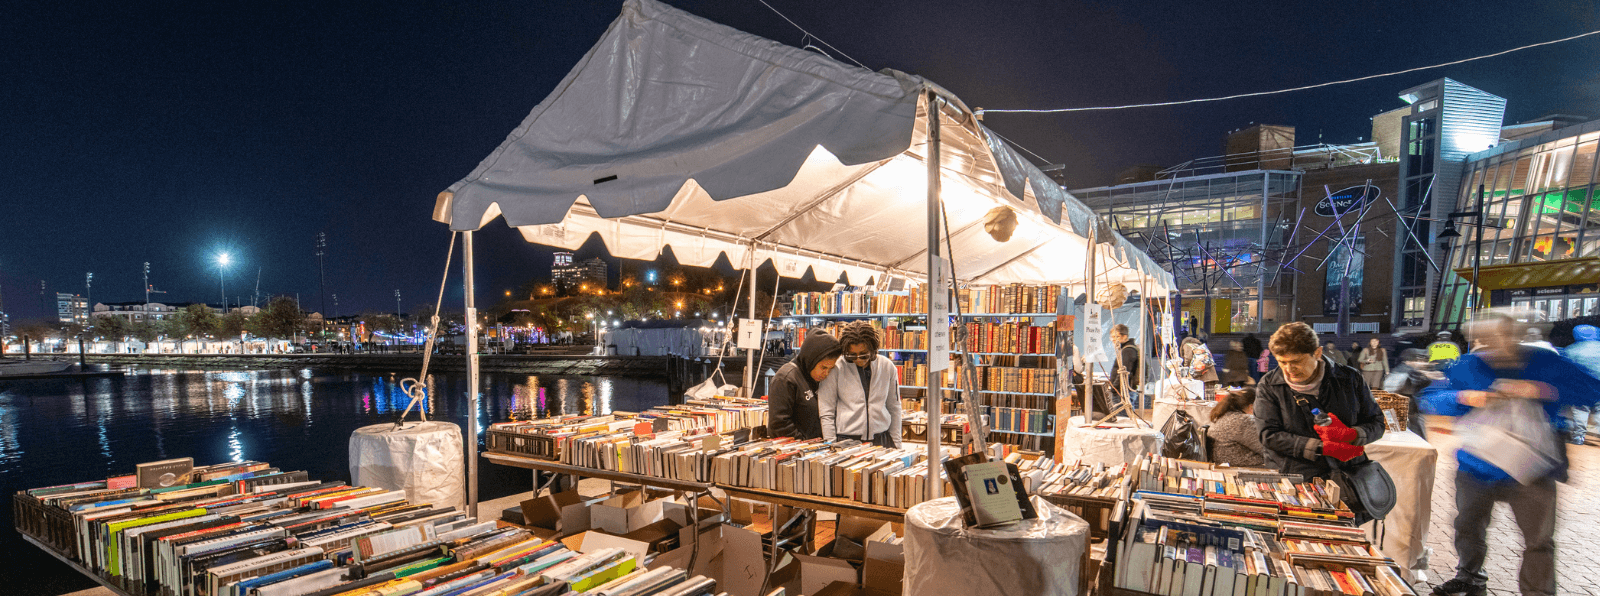 People browsing books at an outdoor tent next to a body of water